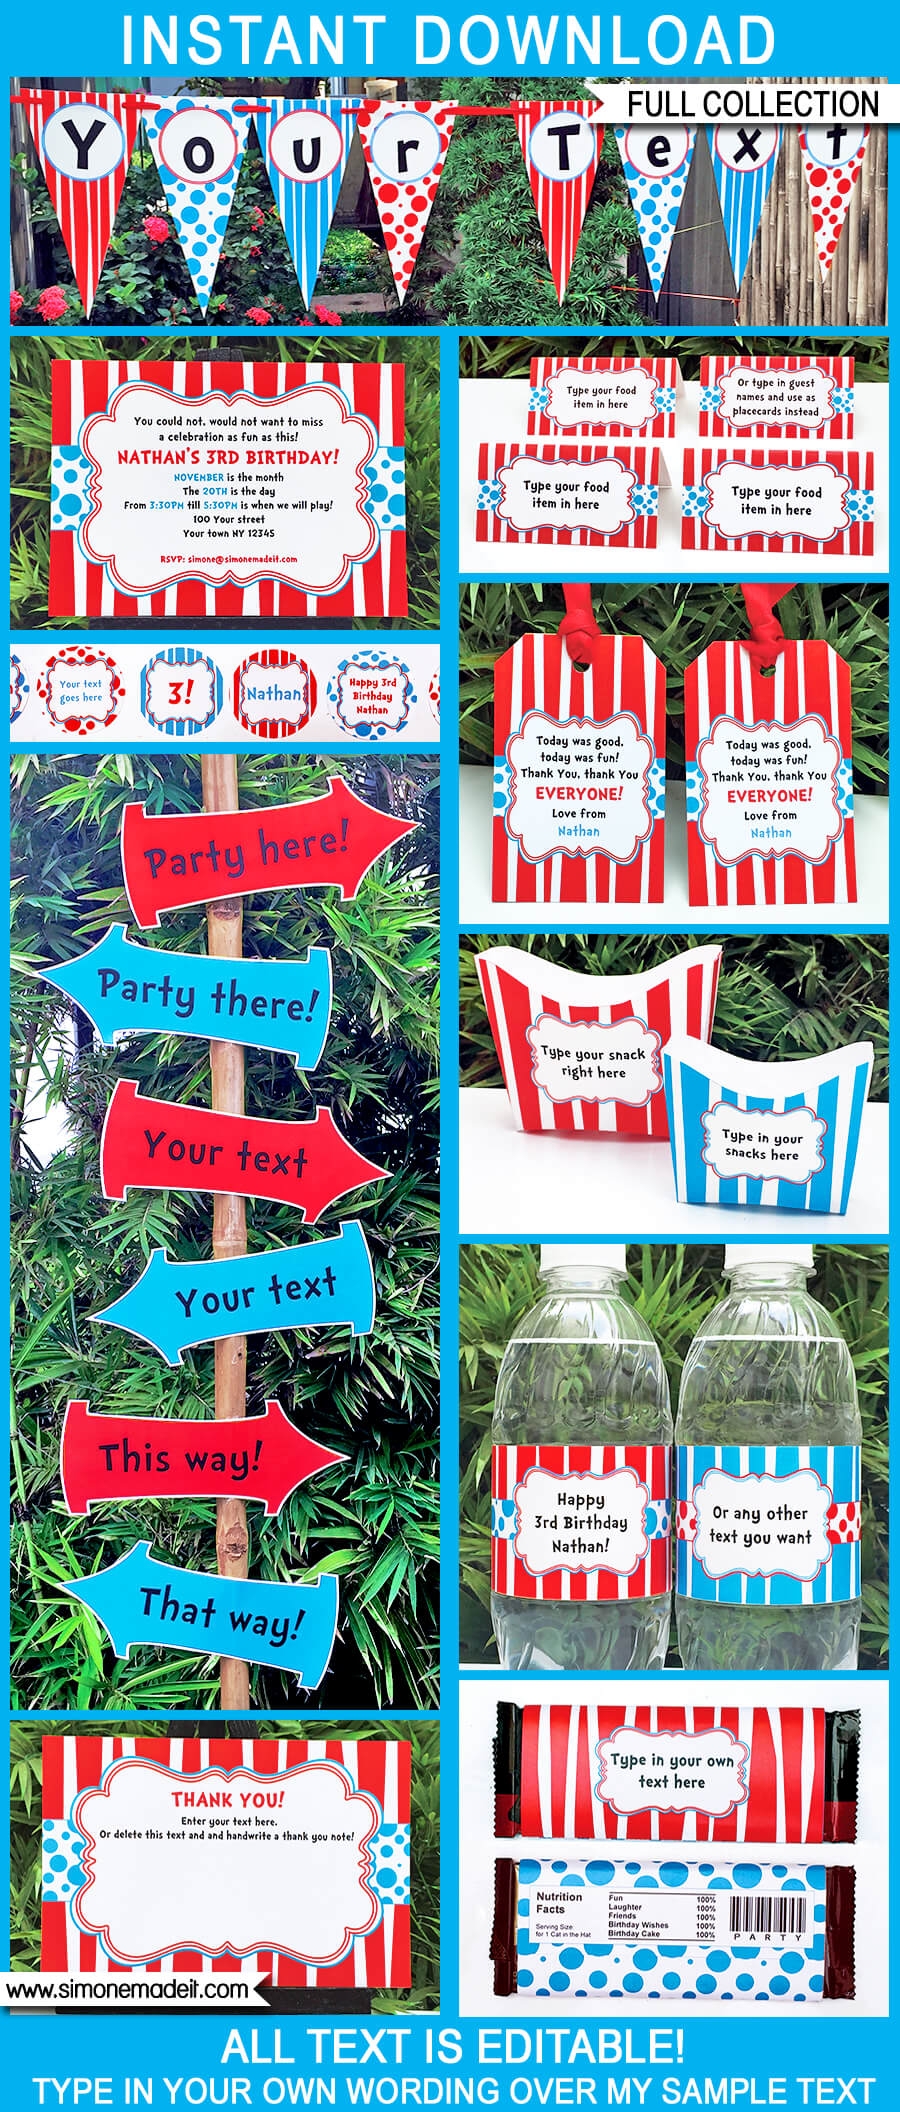 Dr Seuss Party Printables Invitations Decorations Birthday Templates